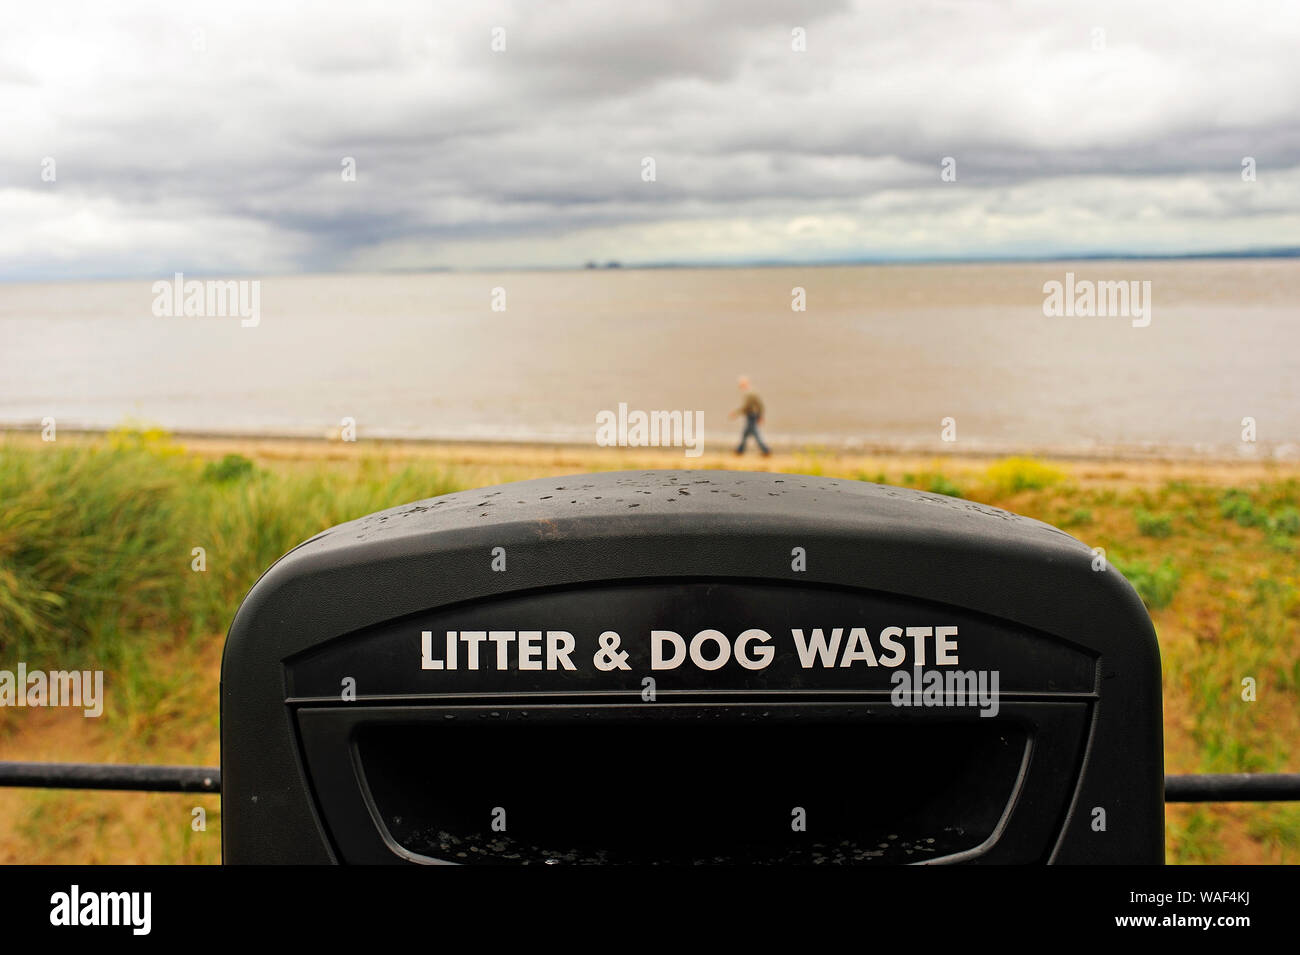 Black plastic rubbish bin for litter and dog waste on Fleetwood seafront on a cold wet day Stock Photo